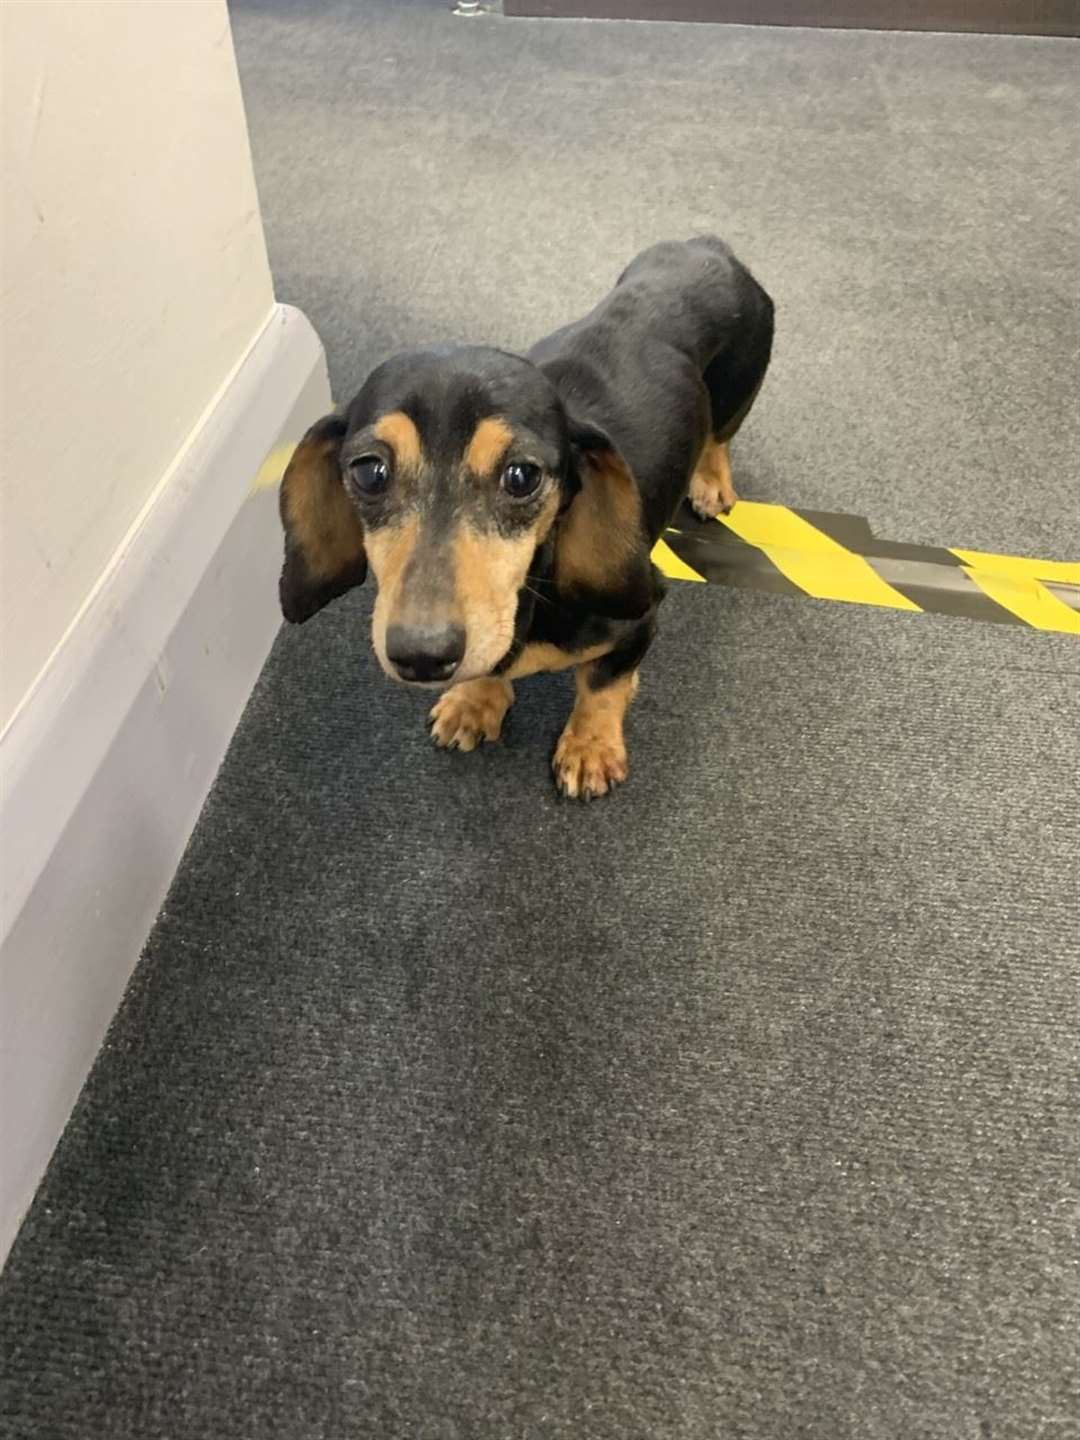 The dachshund found wandering tracks Picture: Southeastern